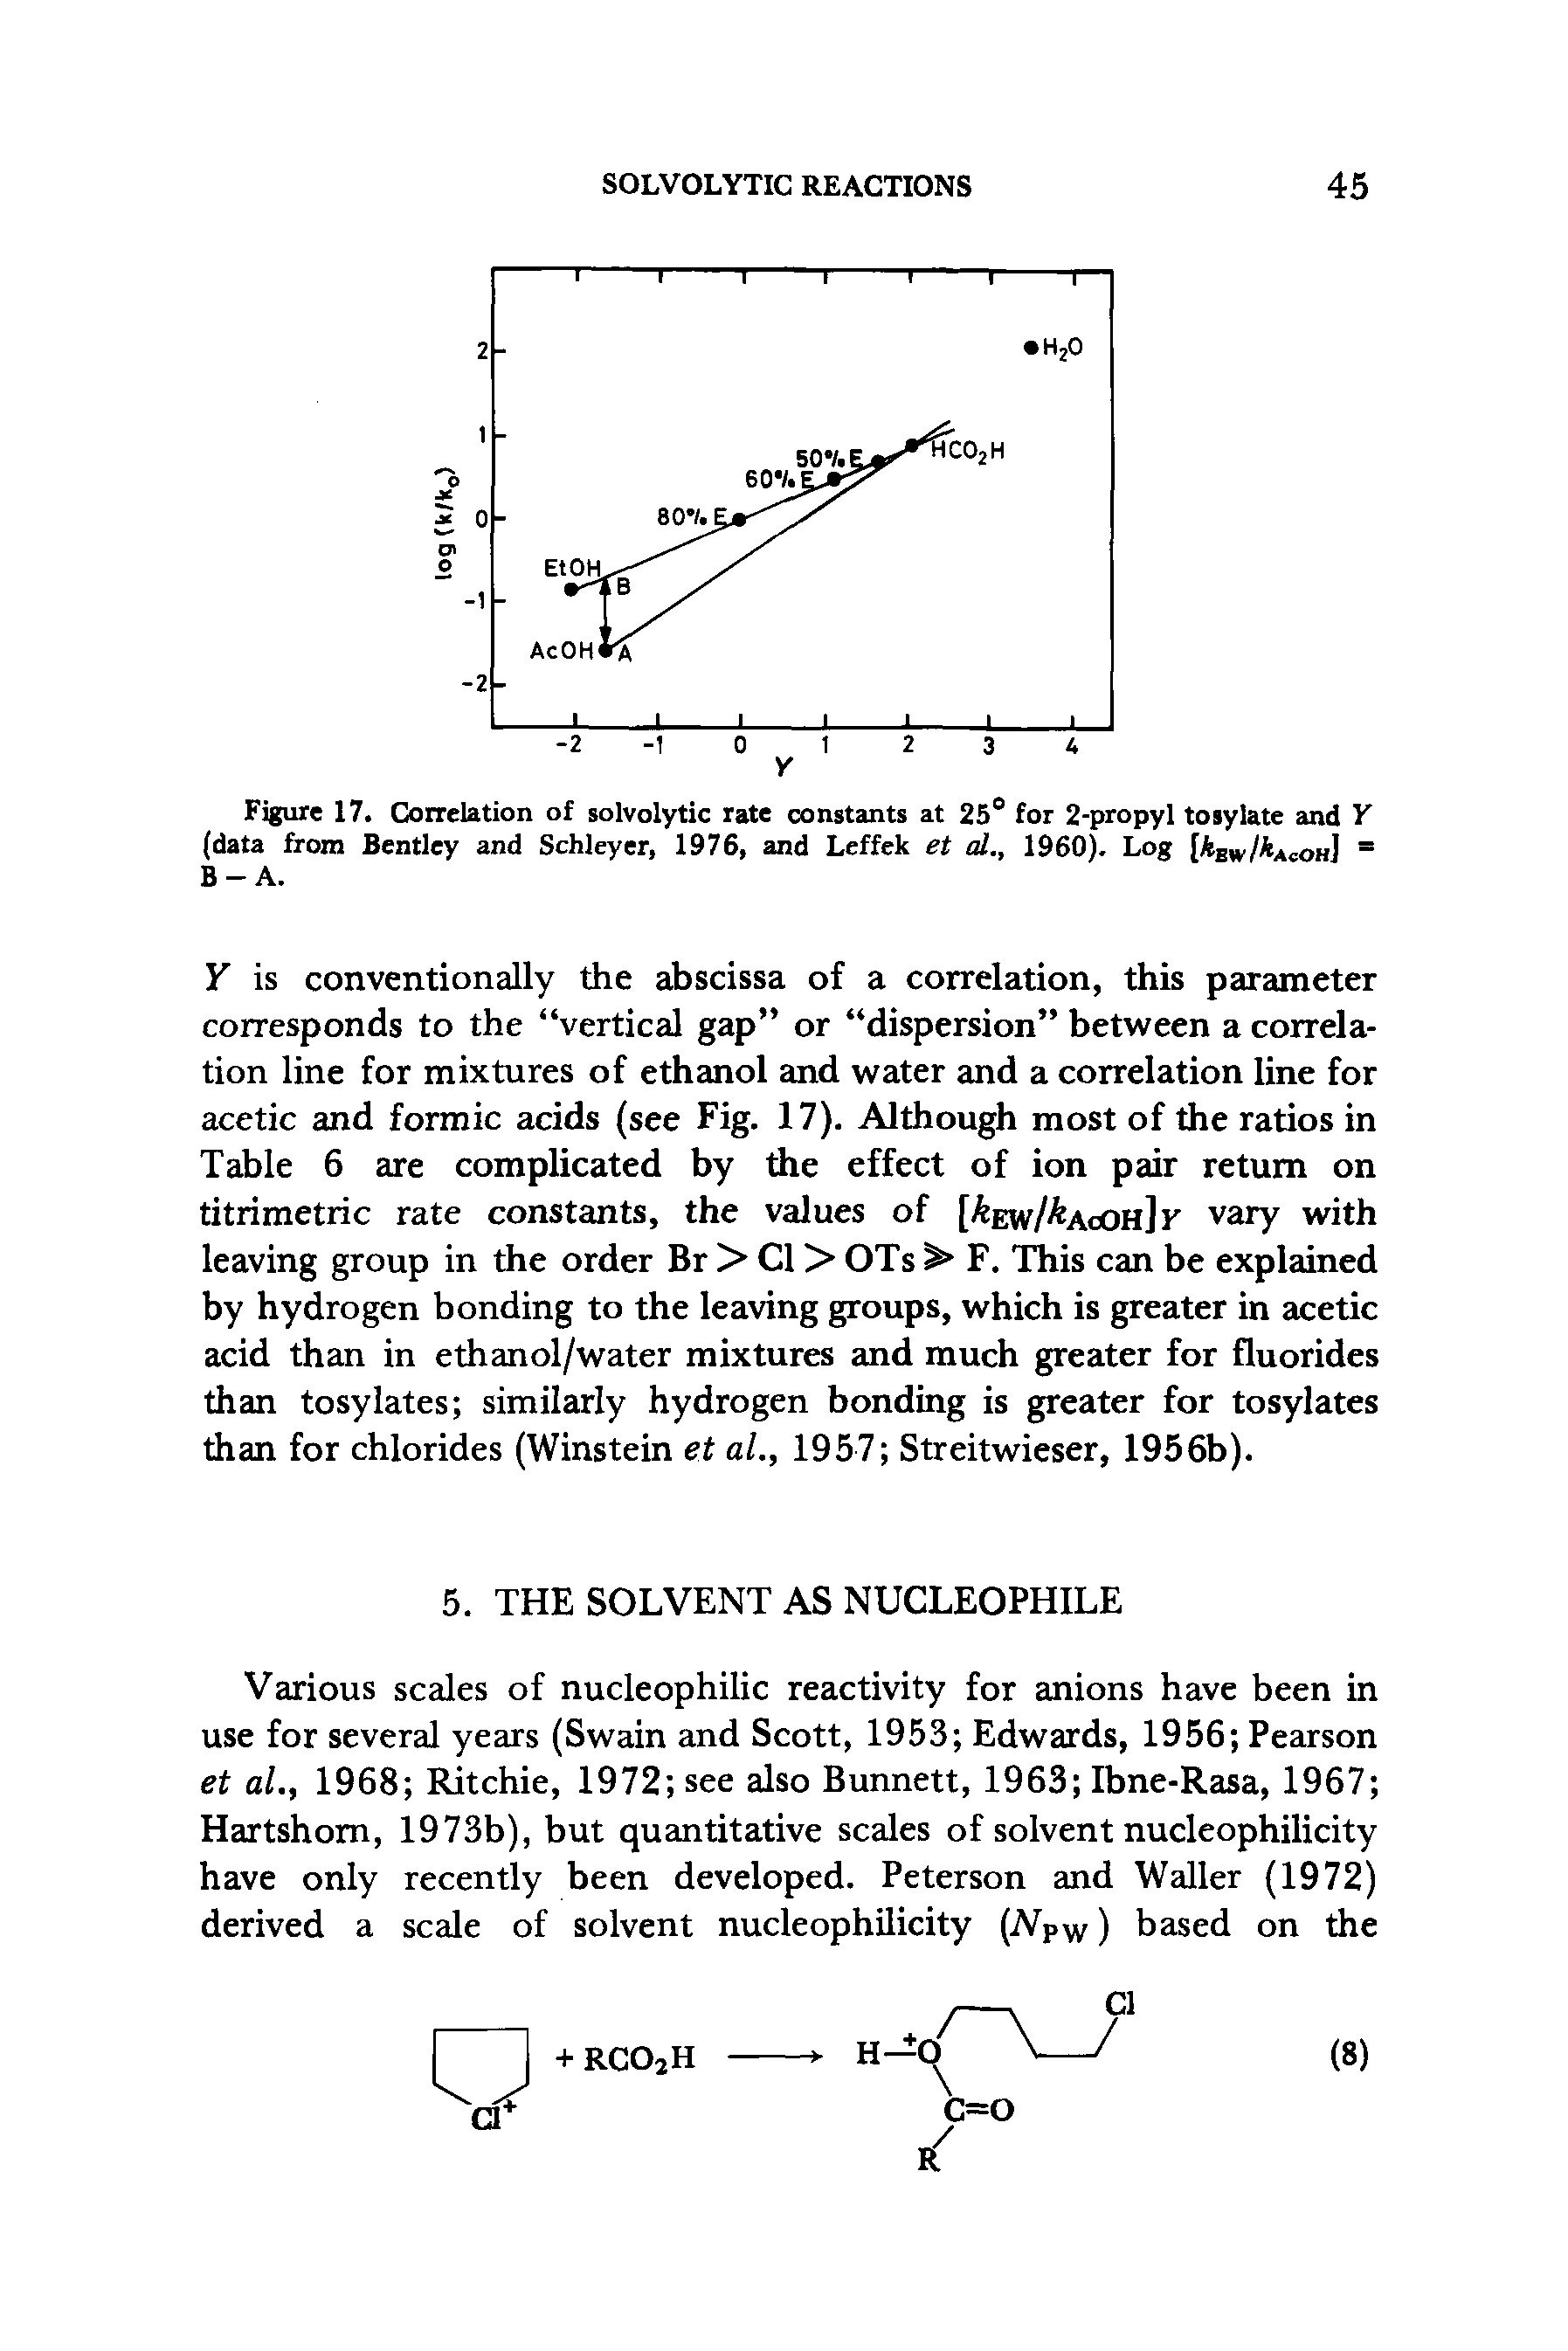 Figure 17. Correlation of solvolytic rate constants at 25° for 2-propyl tosylate and Y (data from Bentley and Schleyer, 1976, and Leffek et al., 1960). Log [kEW/kAeOH] = B-A.